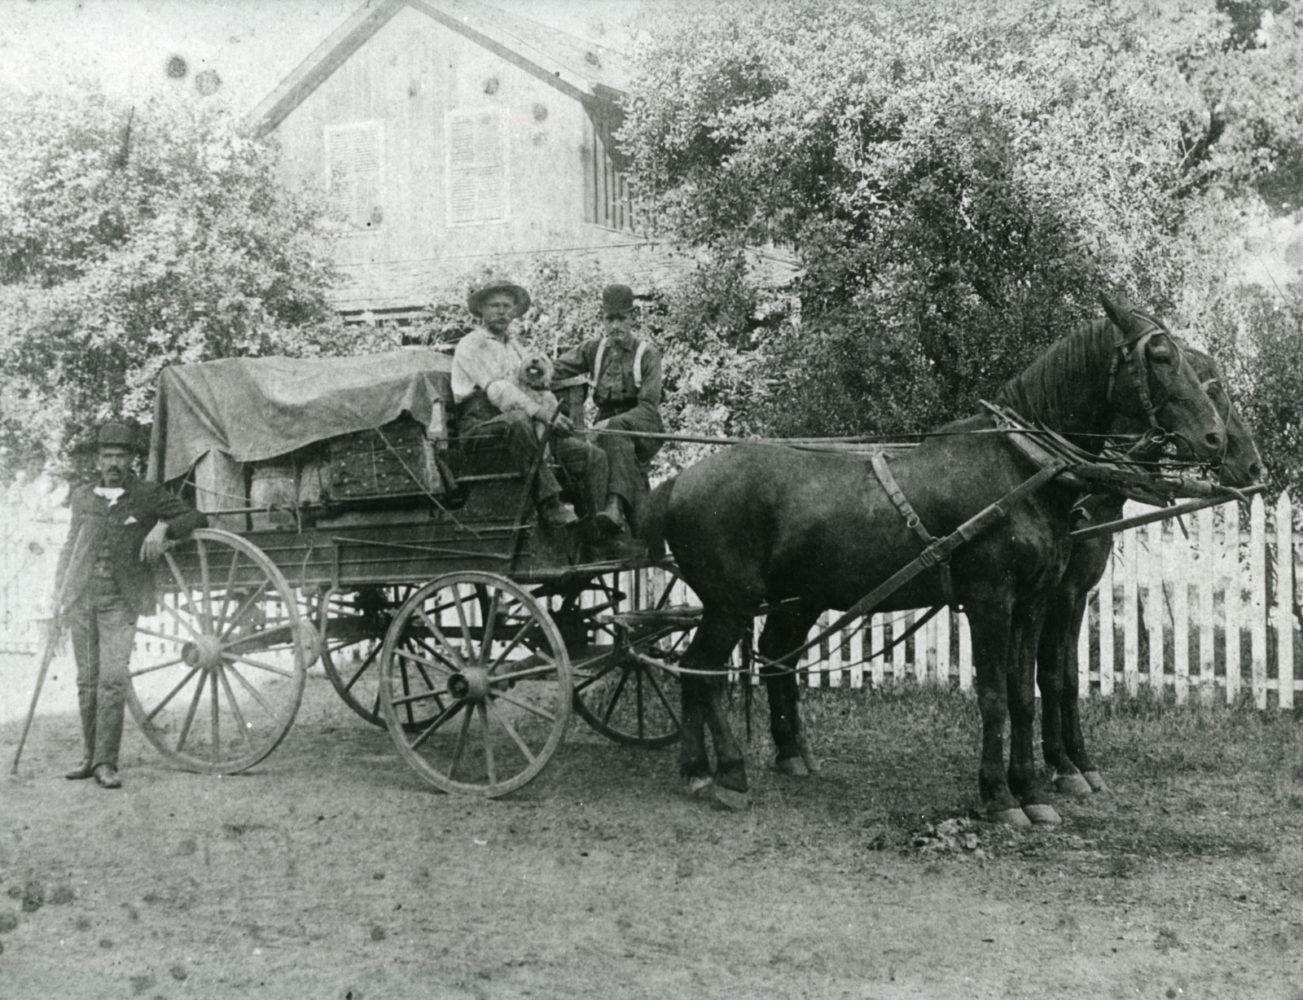 Men with supplies on horse and carriage outside the Woodside Store